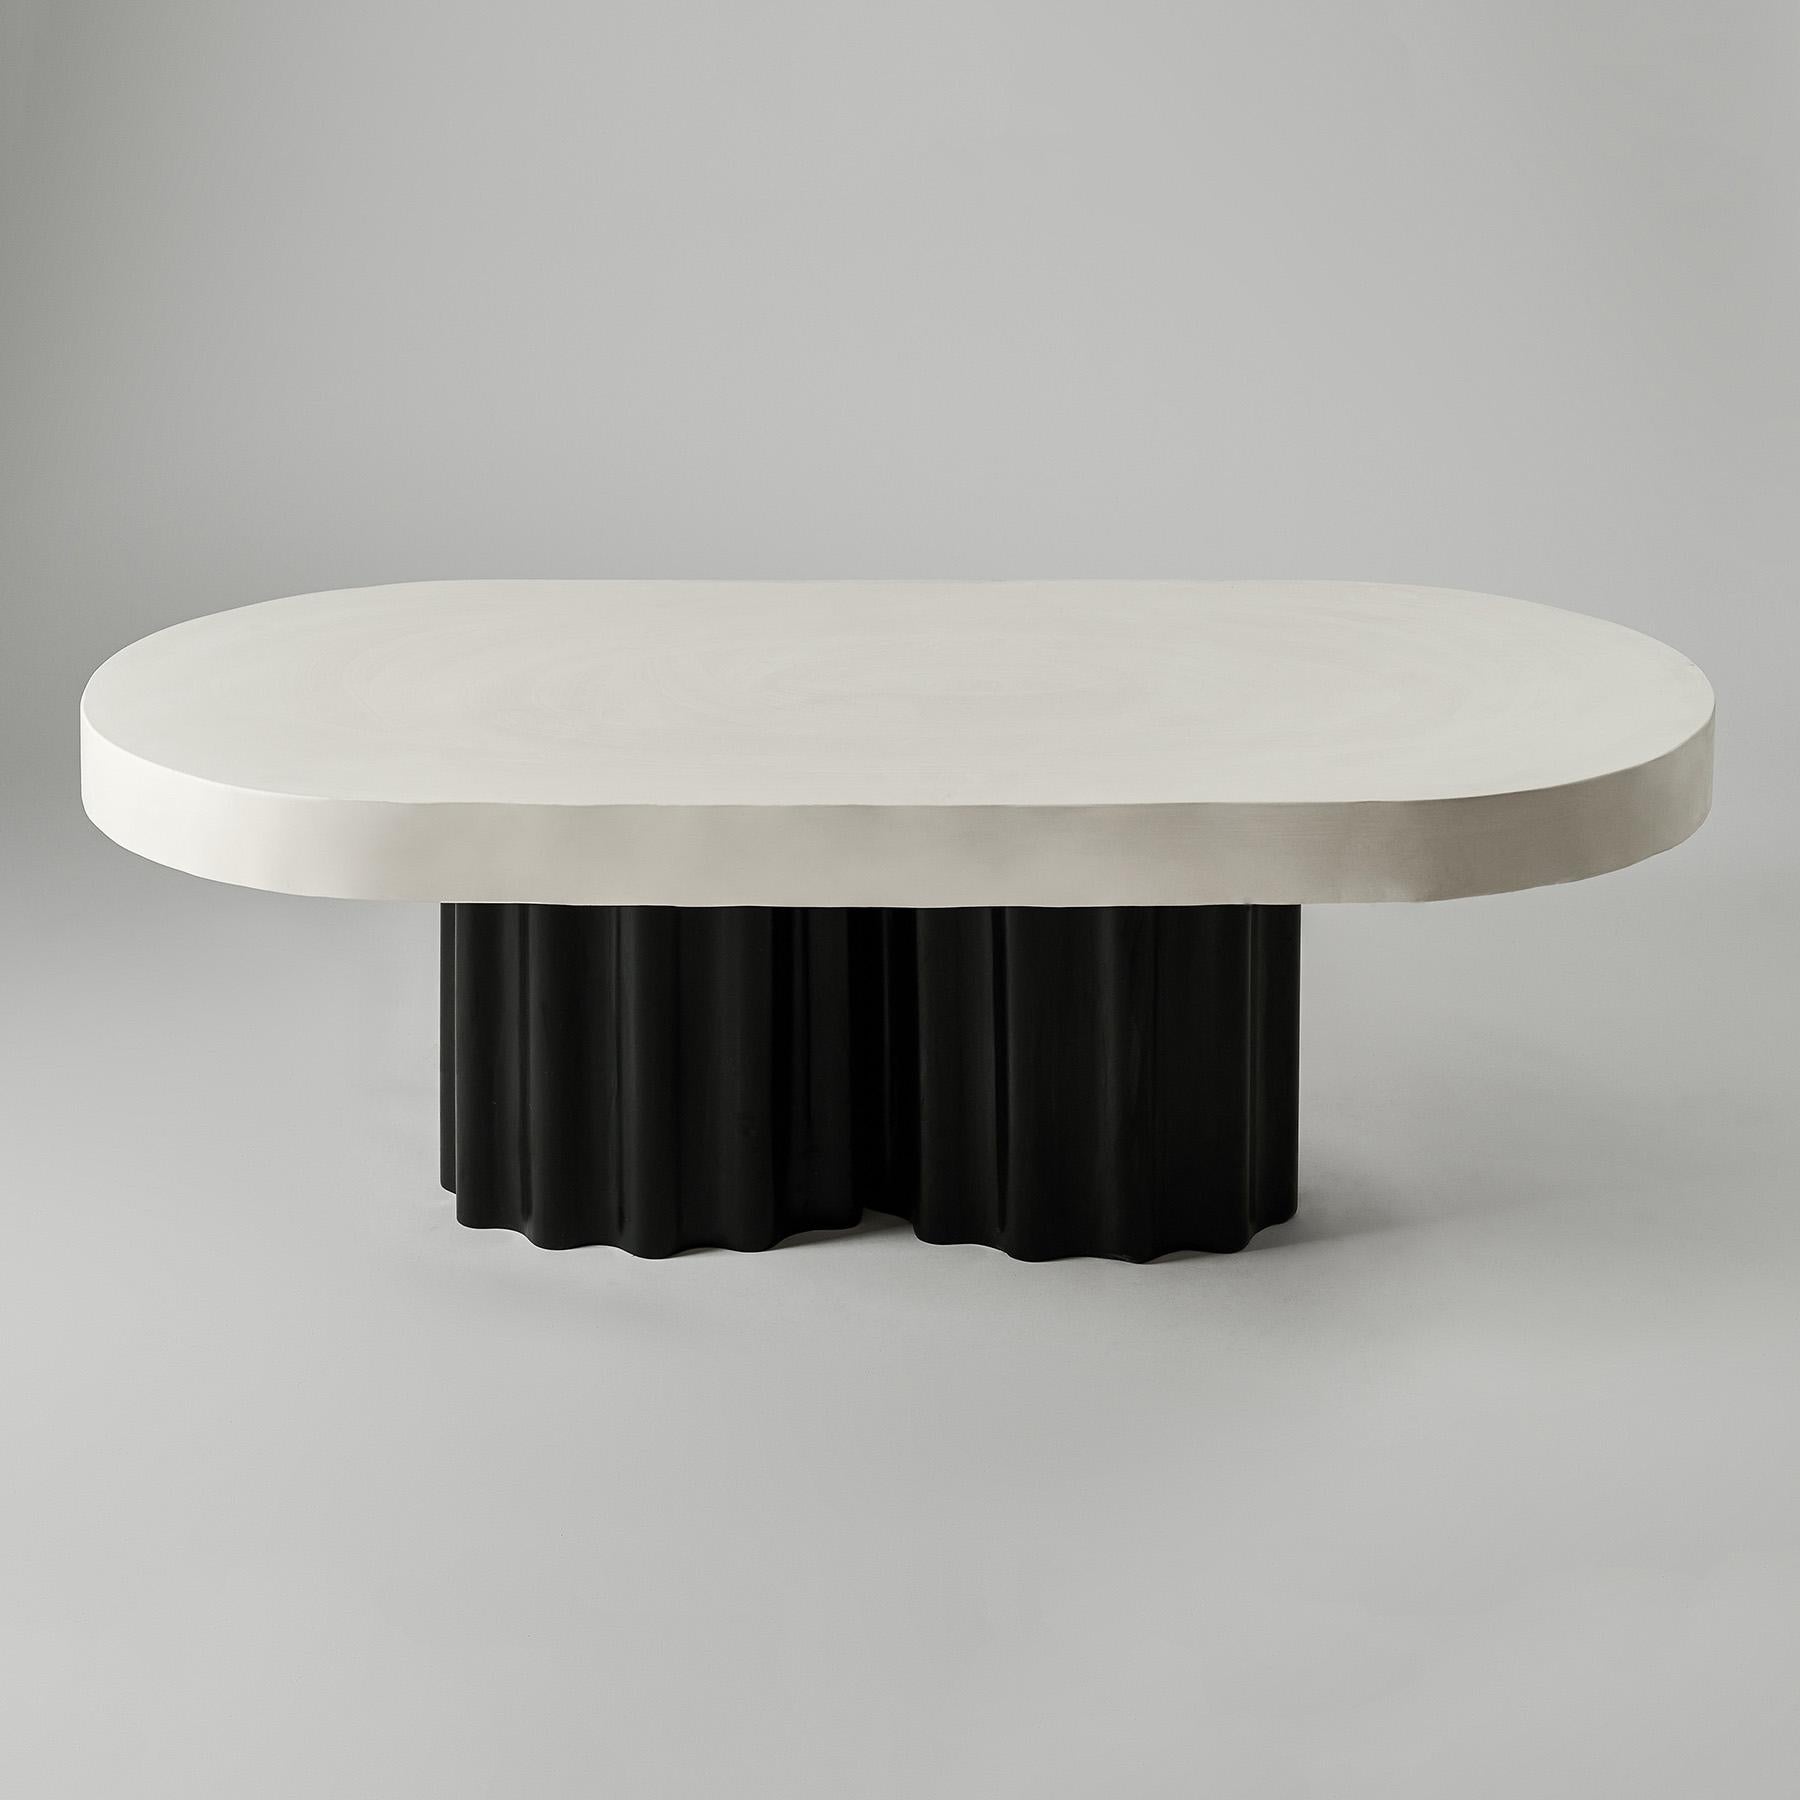 Ivory And Black Oval Coffee Table by Perler
Dimensions: D 58 x W 120 x H 60 cm.
Materials: Jesmonite.
Weight: 45 kg.

Dimensions may vary. Please contact us.

The Ivory&Black oval coffee table, standing on a wavy black leg, measures 120 cm in length